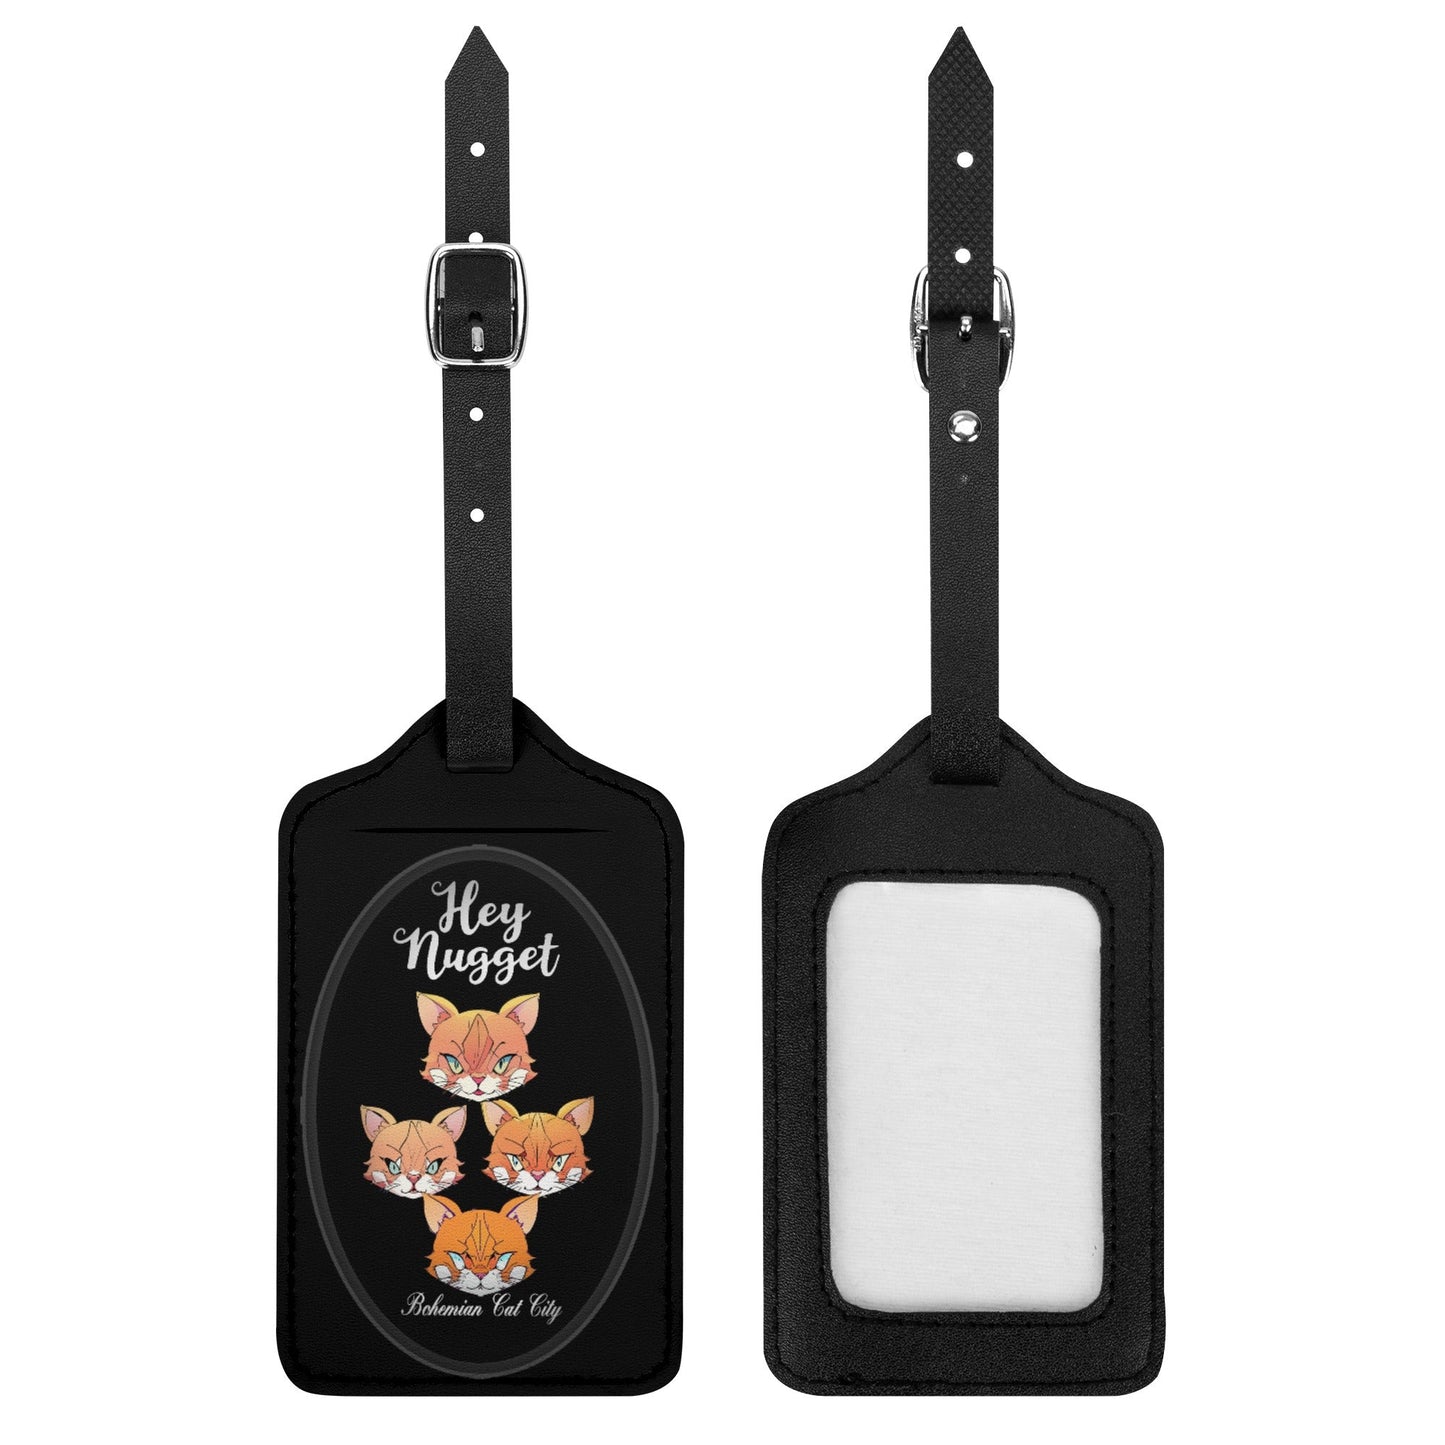 Stand out  with the  Bohemian Cat City  Luggage Tags  available at Hey Nugget. Grab yours today!